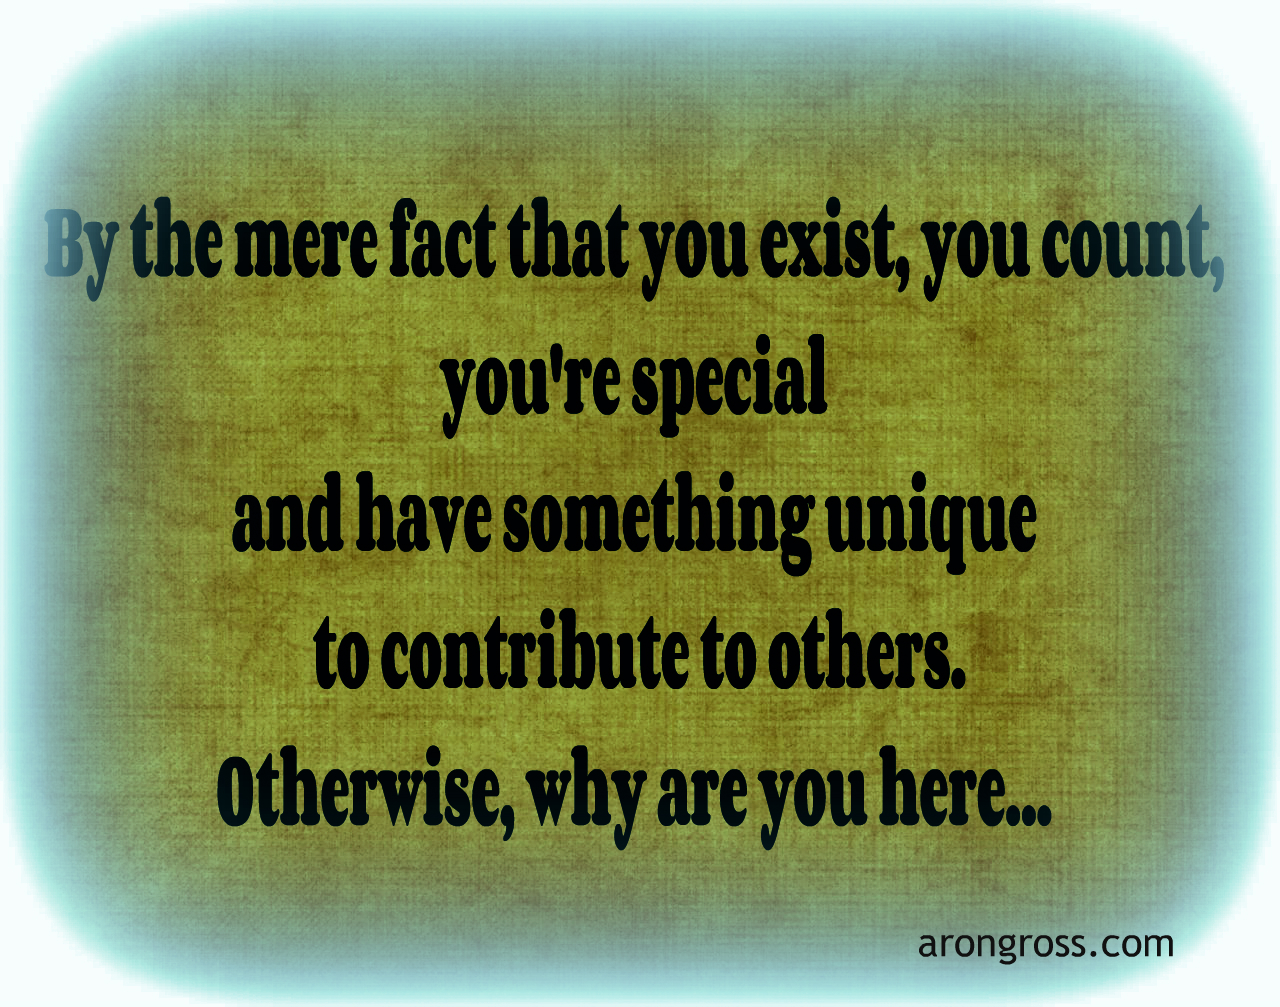 By the mere fact that you exist, you count.